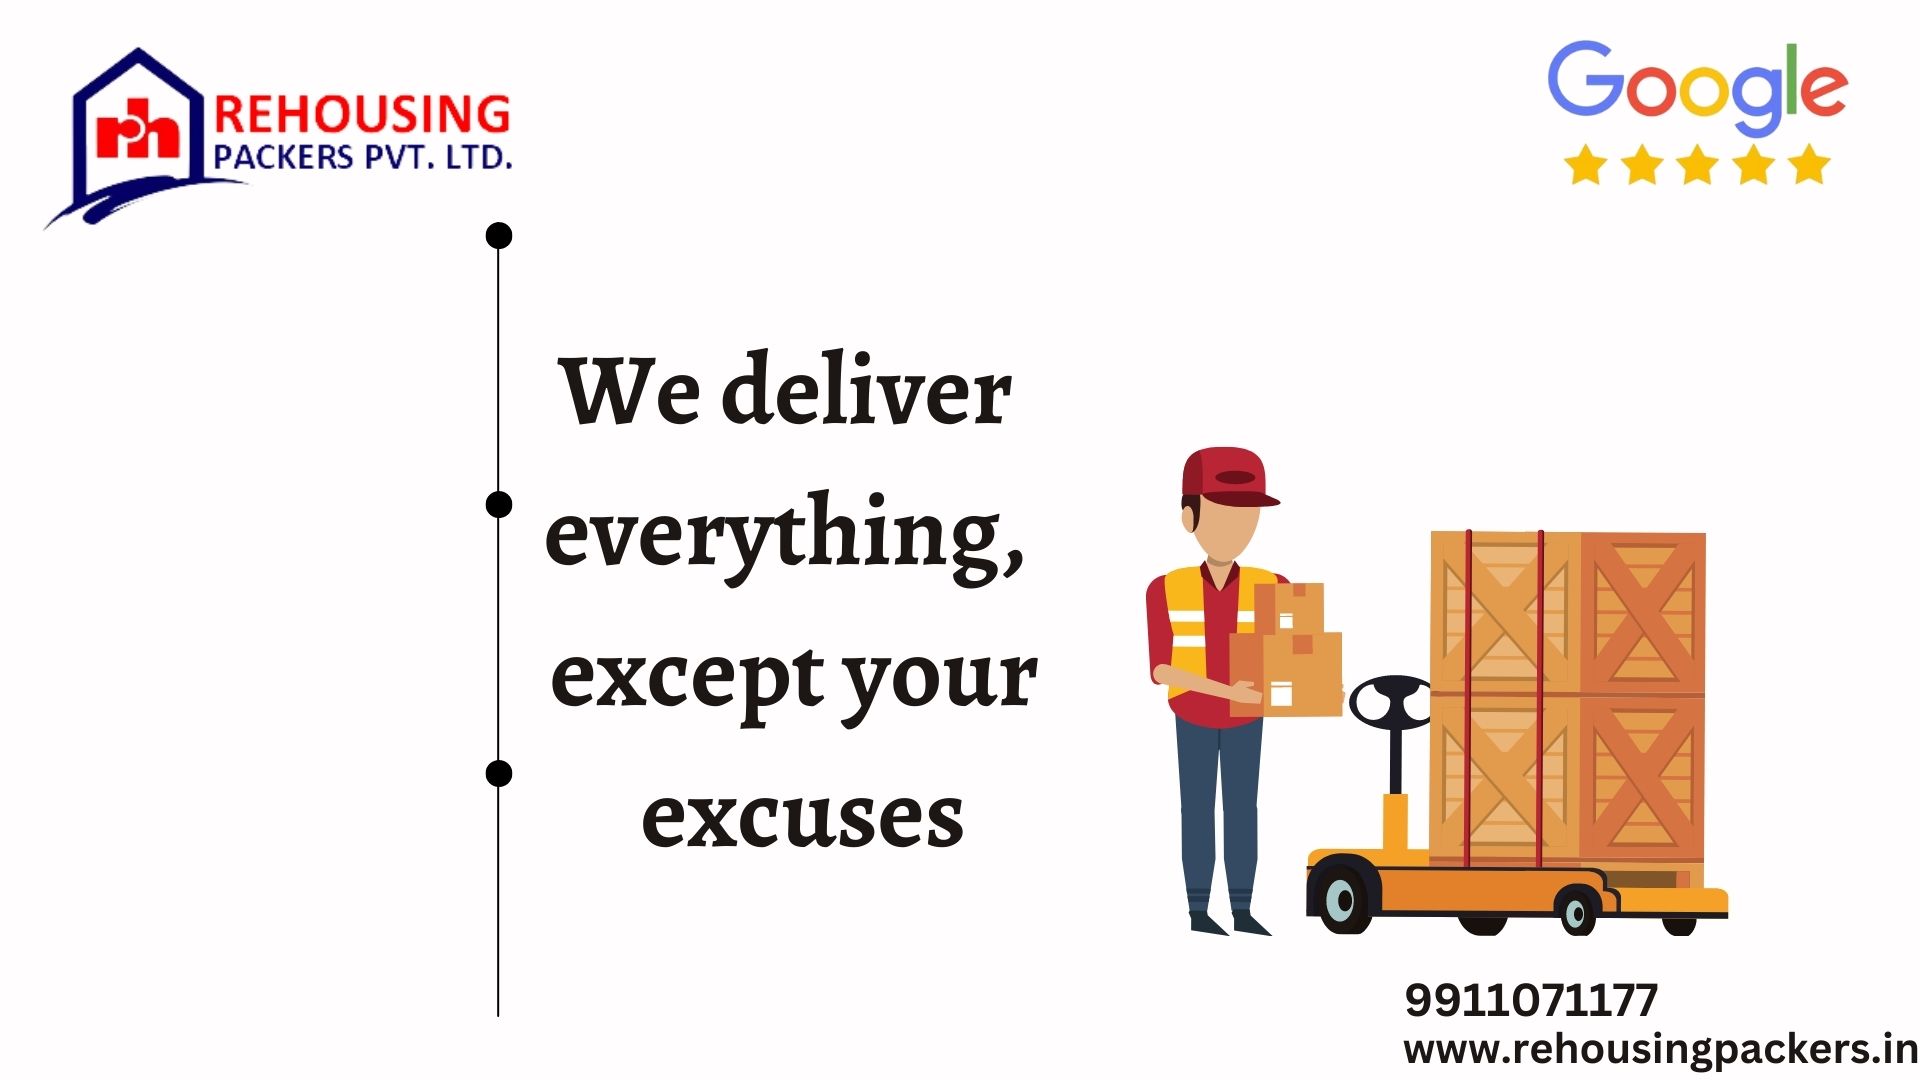 Packers and Movers Rates list for Local House Shifting In Bhopal